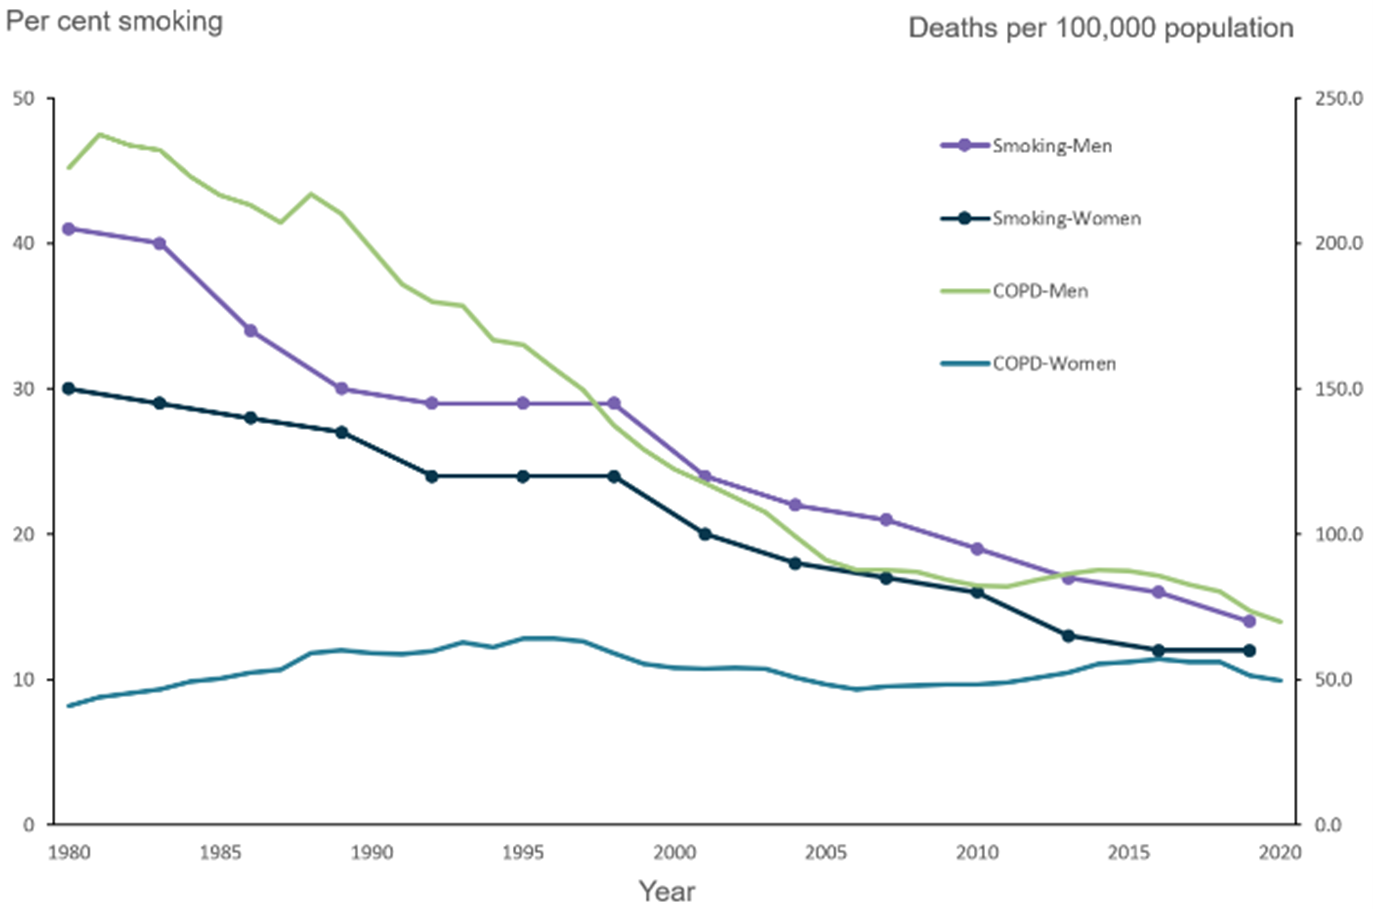 This figure shows that the COPD death rate for men aged 45 and over decreased overall between 1980 and 2020.